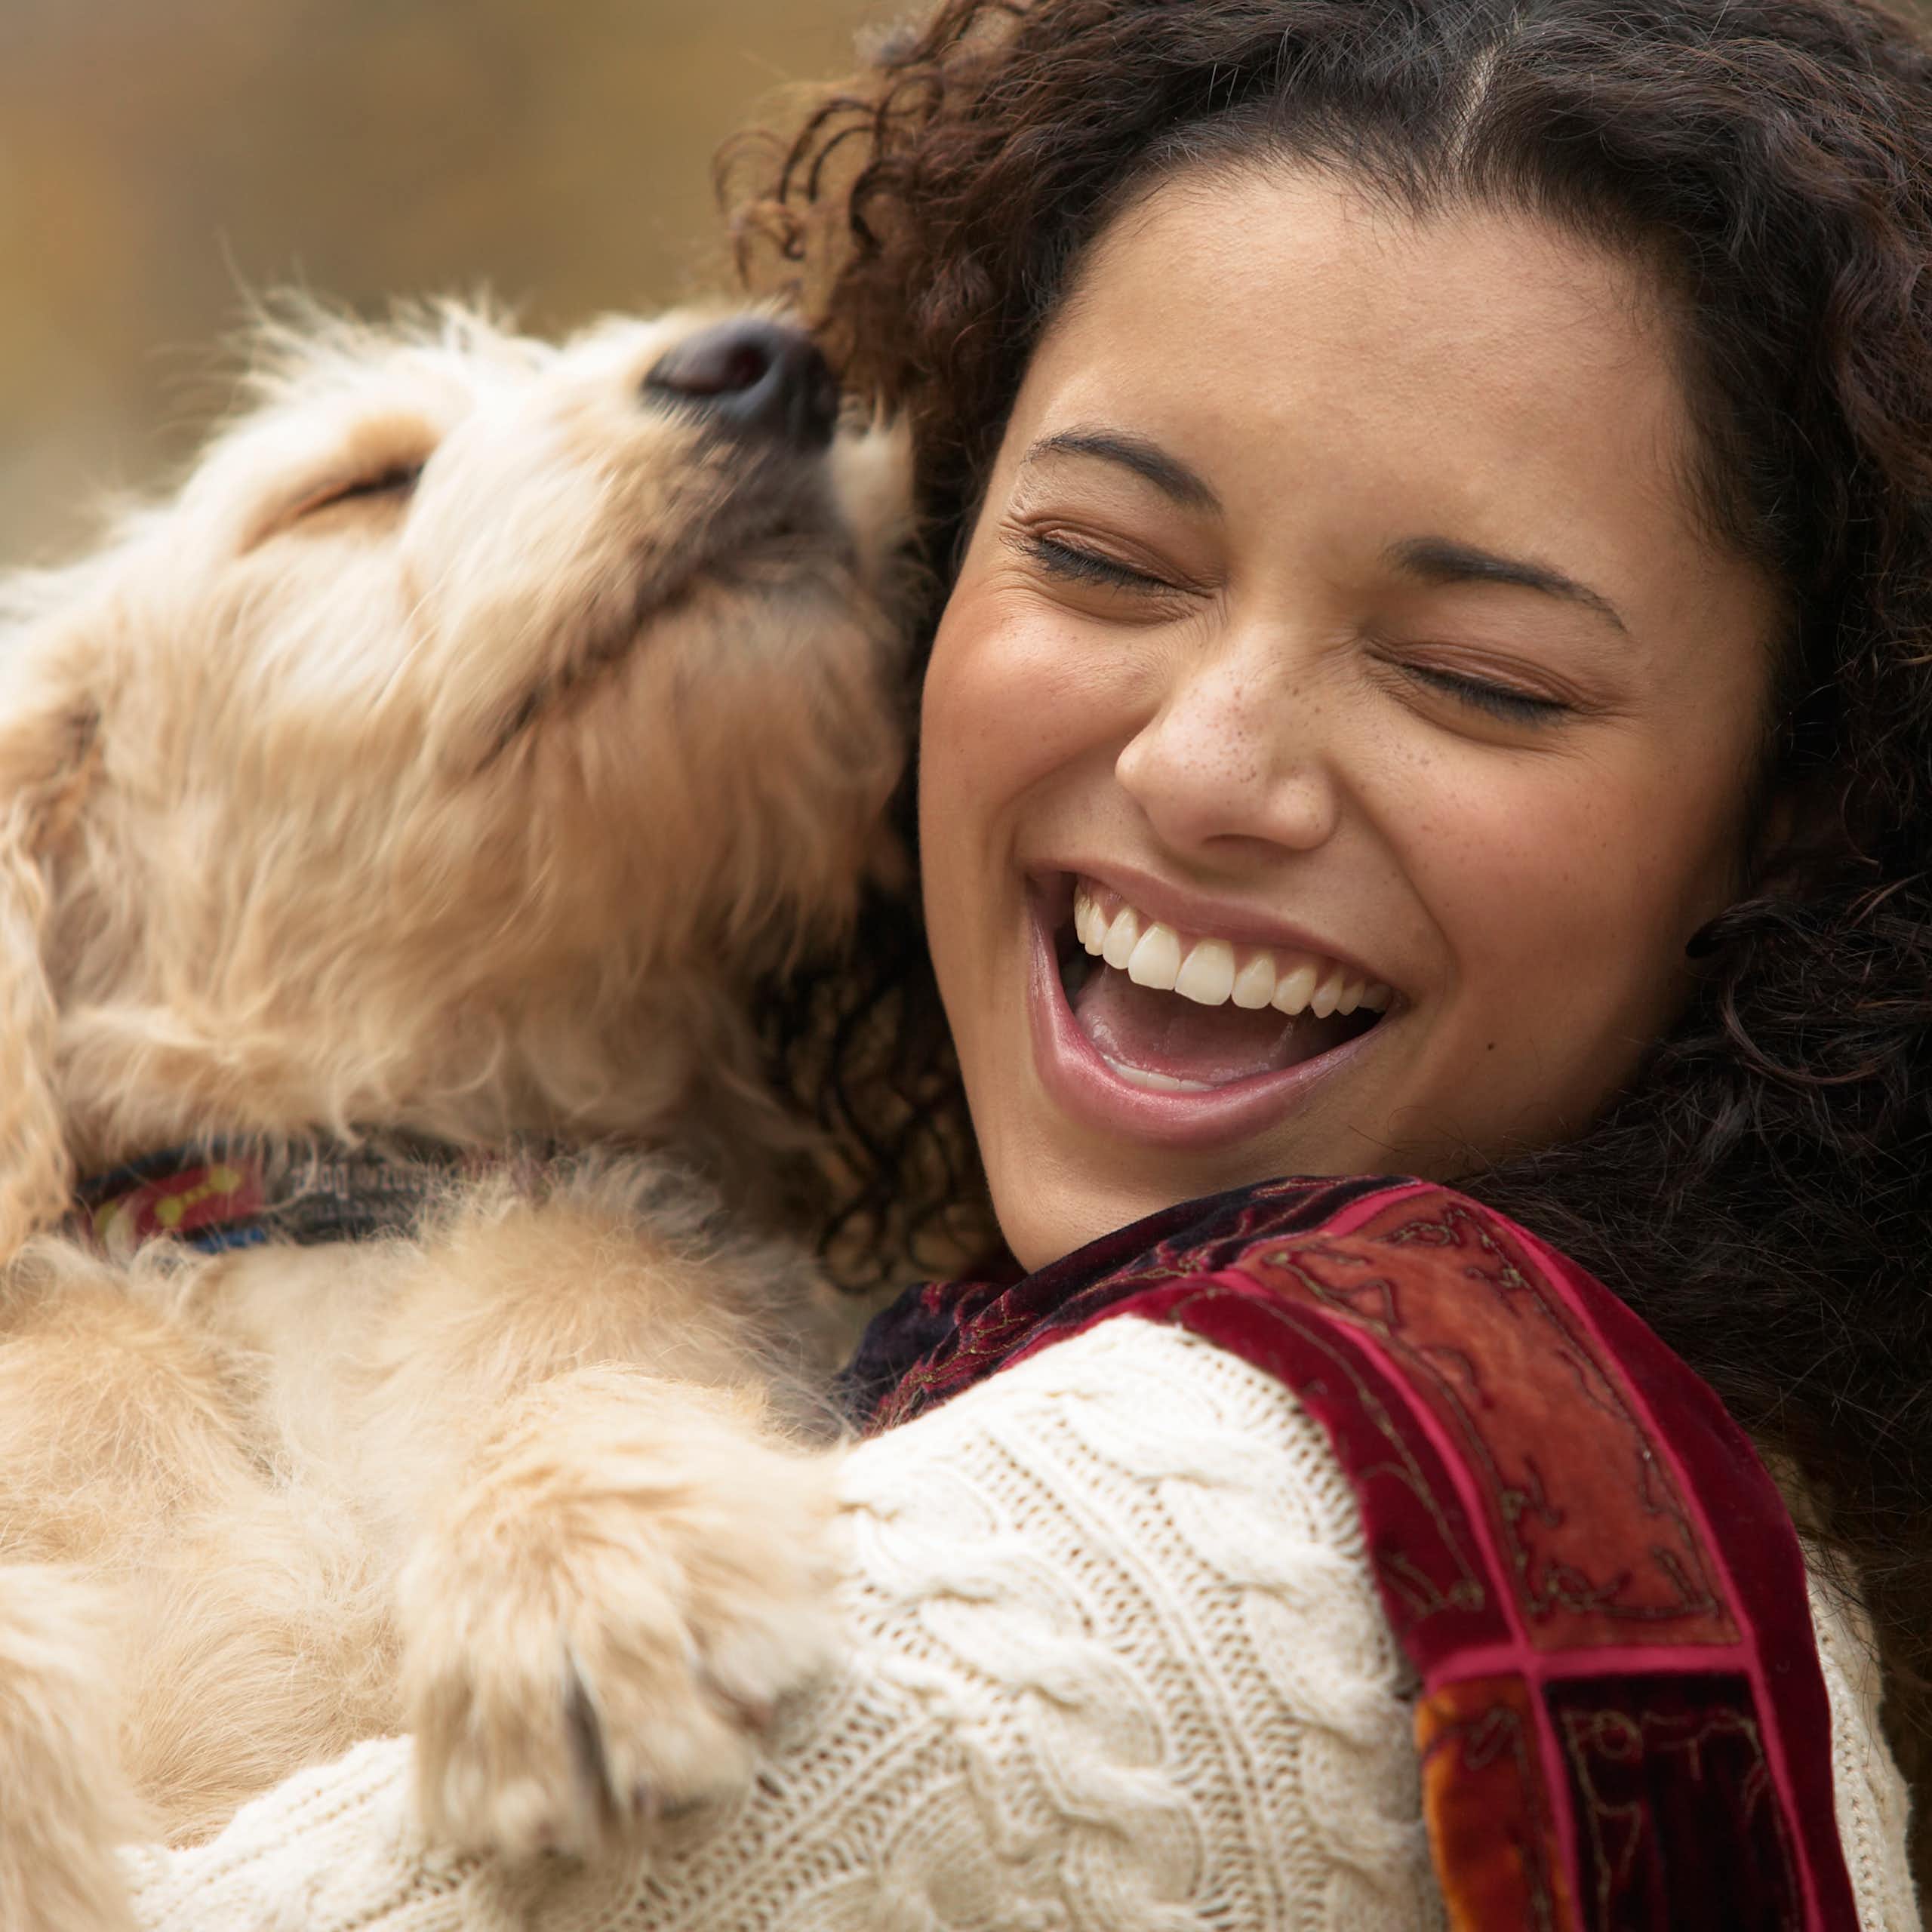 Pets give companionship, cuddles and joy – and also unavoidable stresses